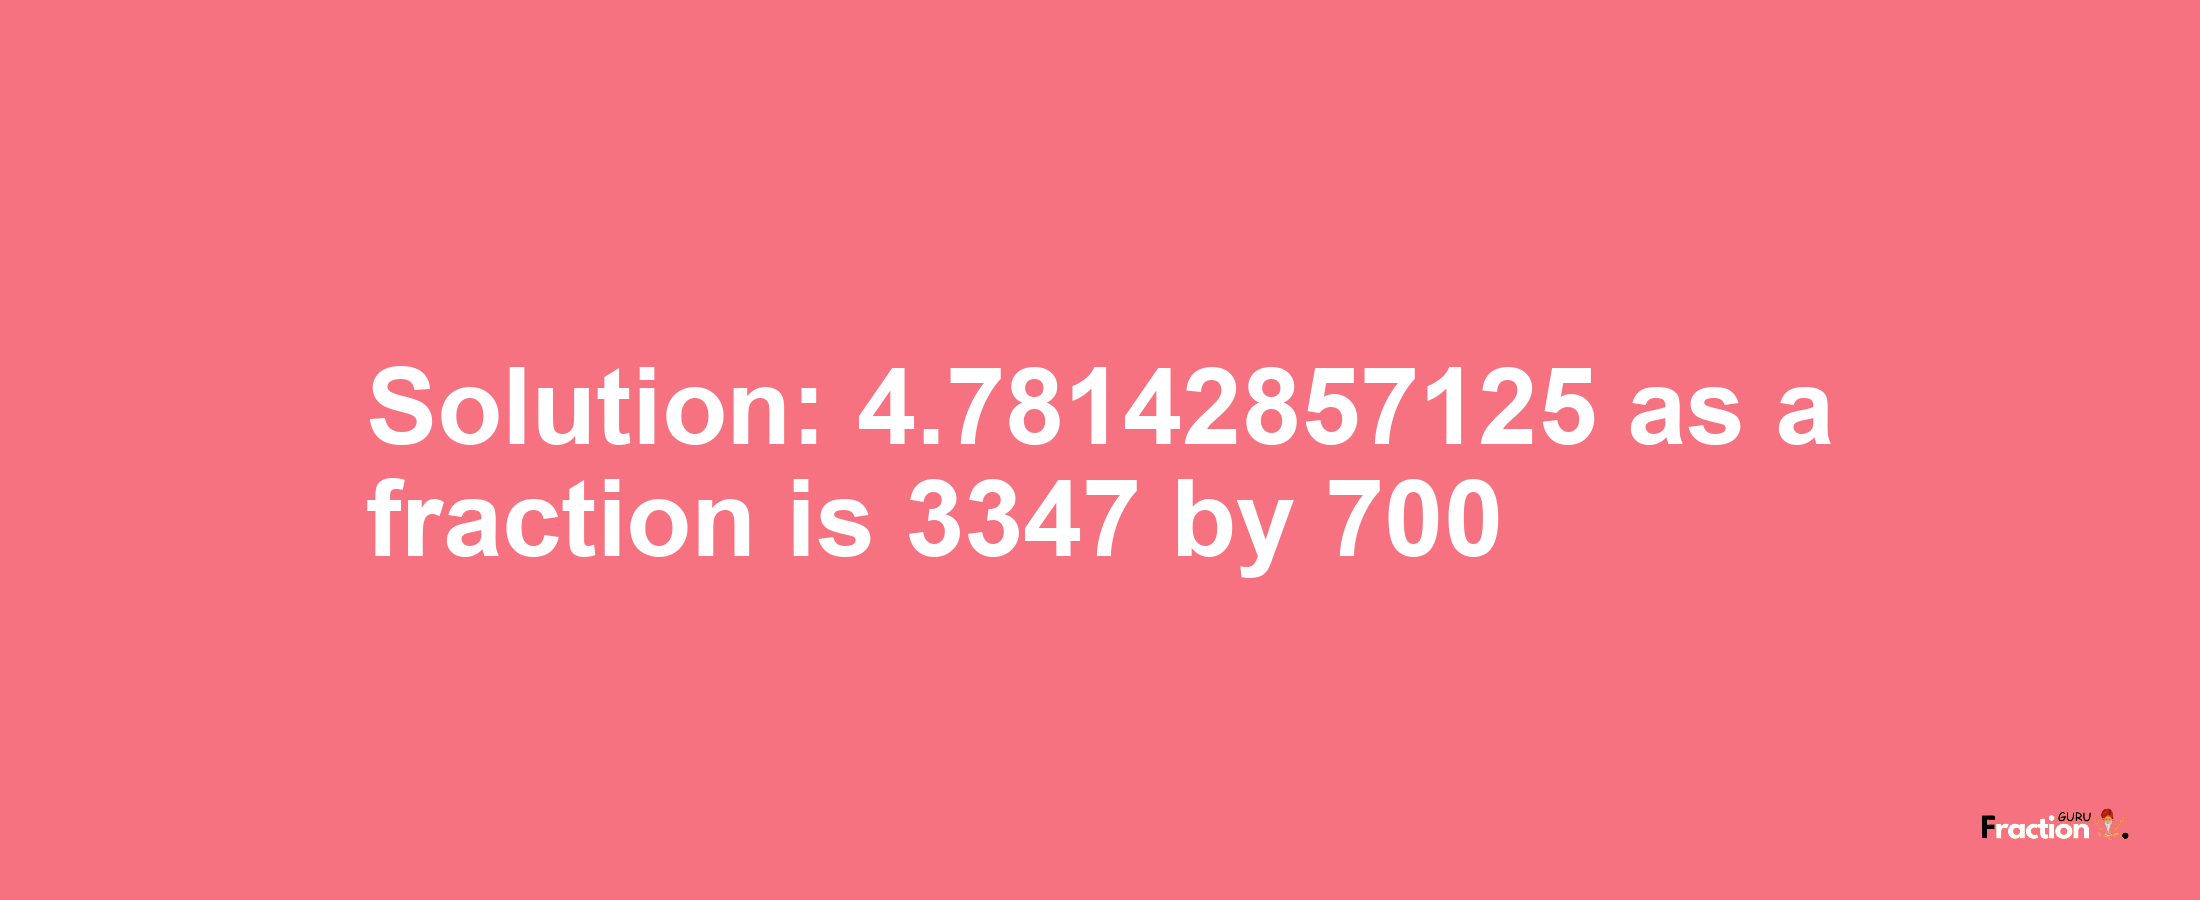 Solution:4.78142857125 as a fraction is 3347/700